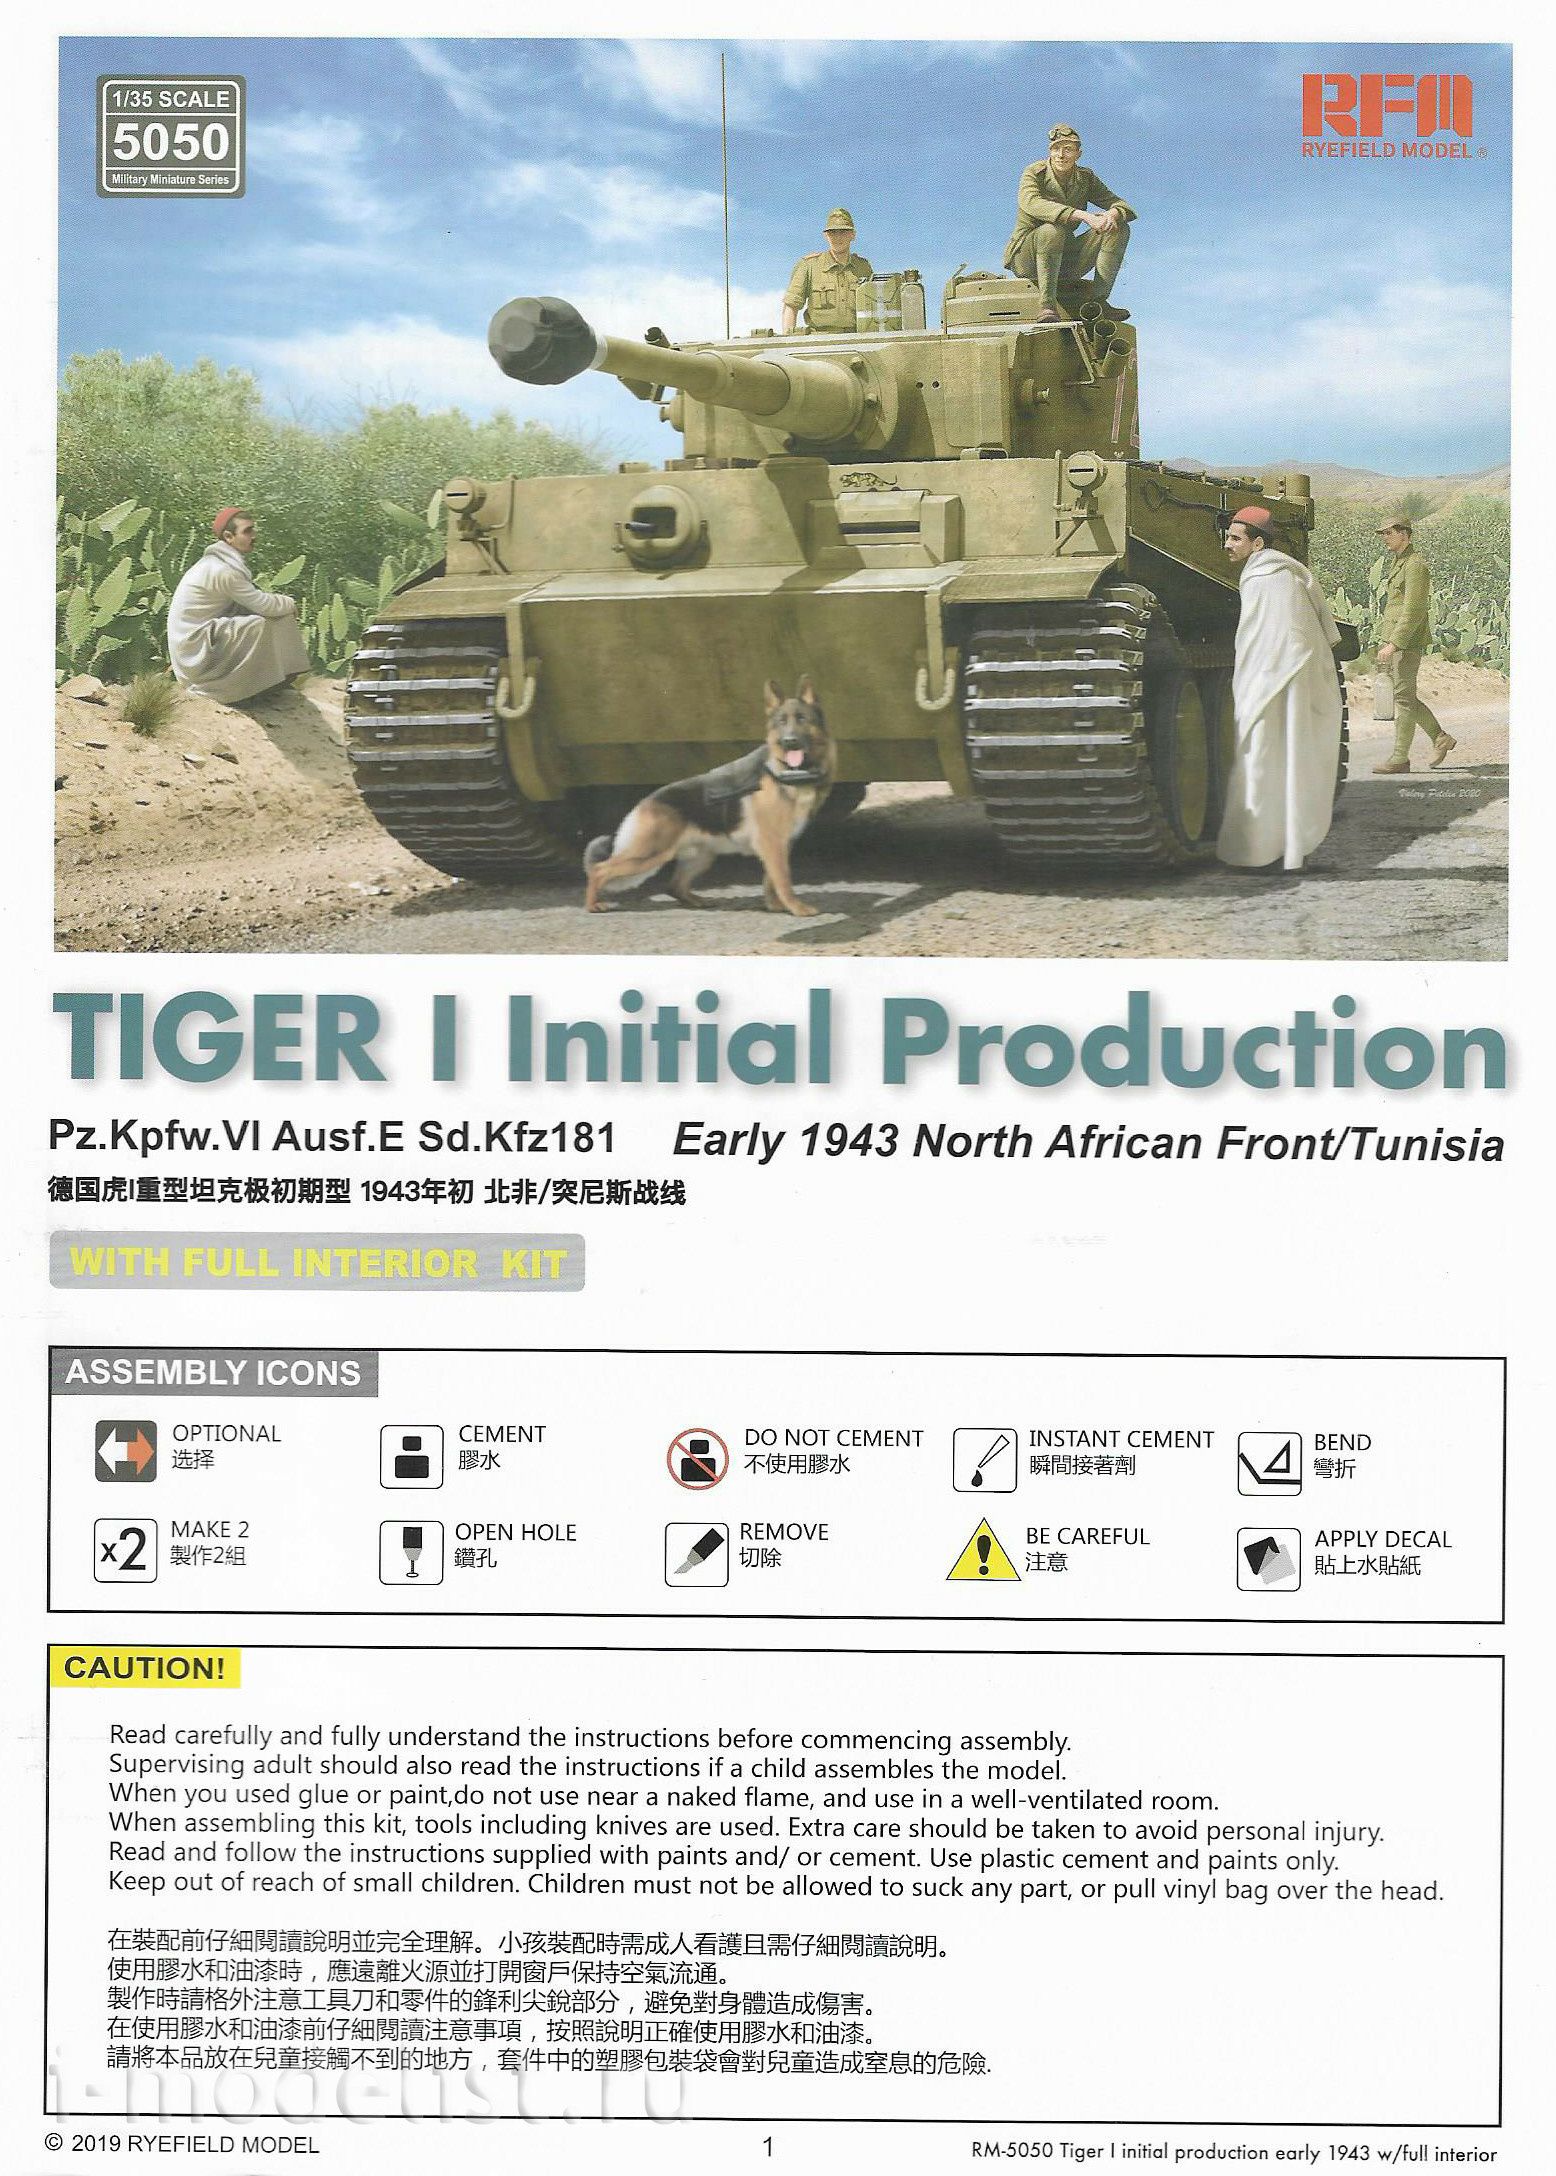 RM-5050 Rye Field Model 1/35 Tank Tiger I Initial Production (Early 1943 North African Front/Tunisia) with Full Interior